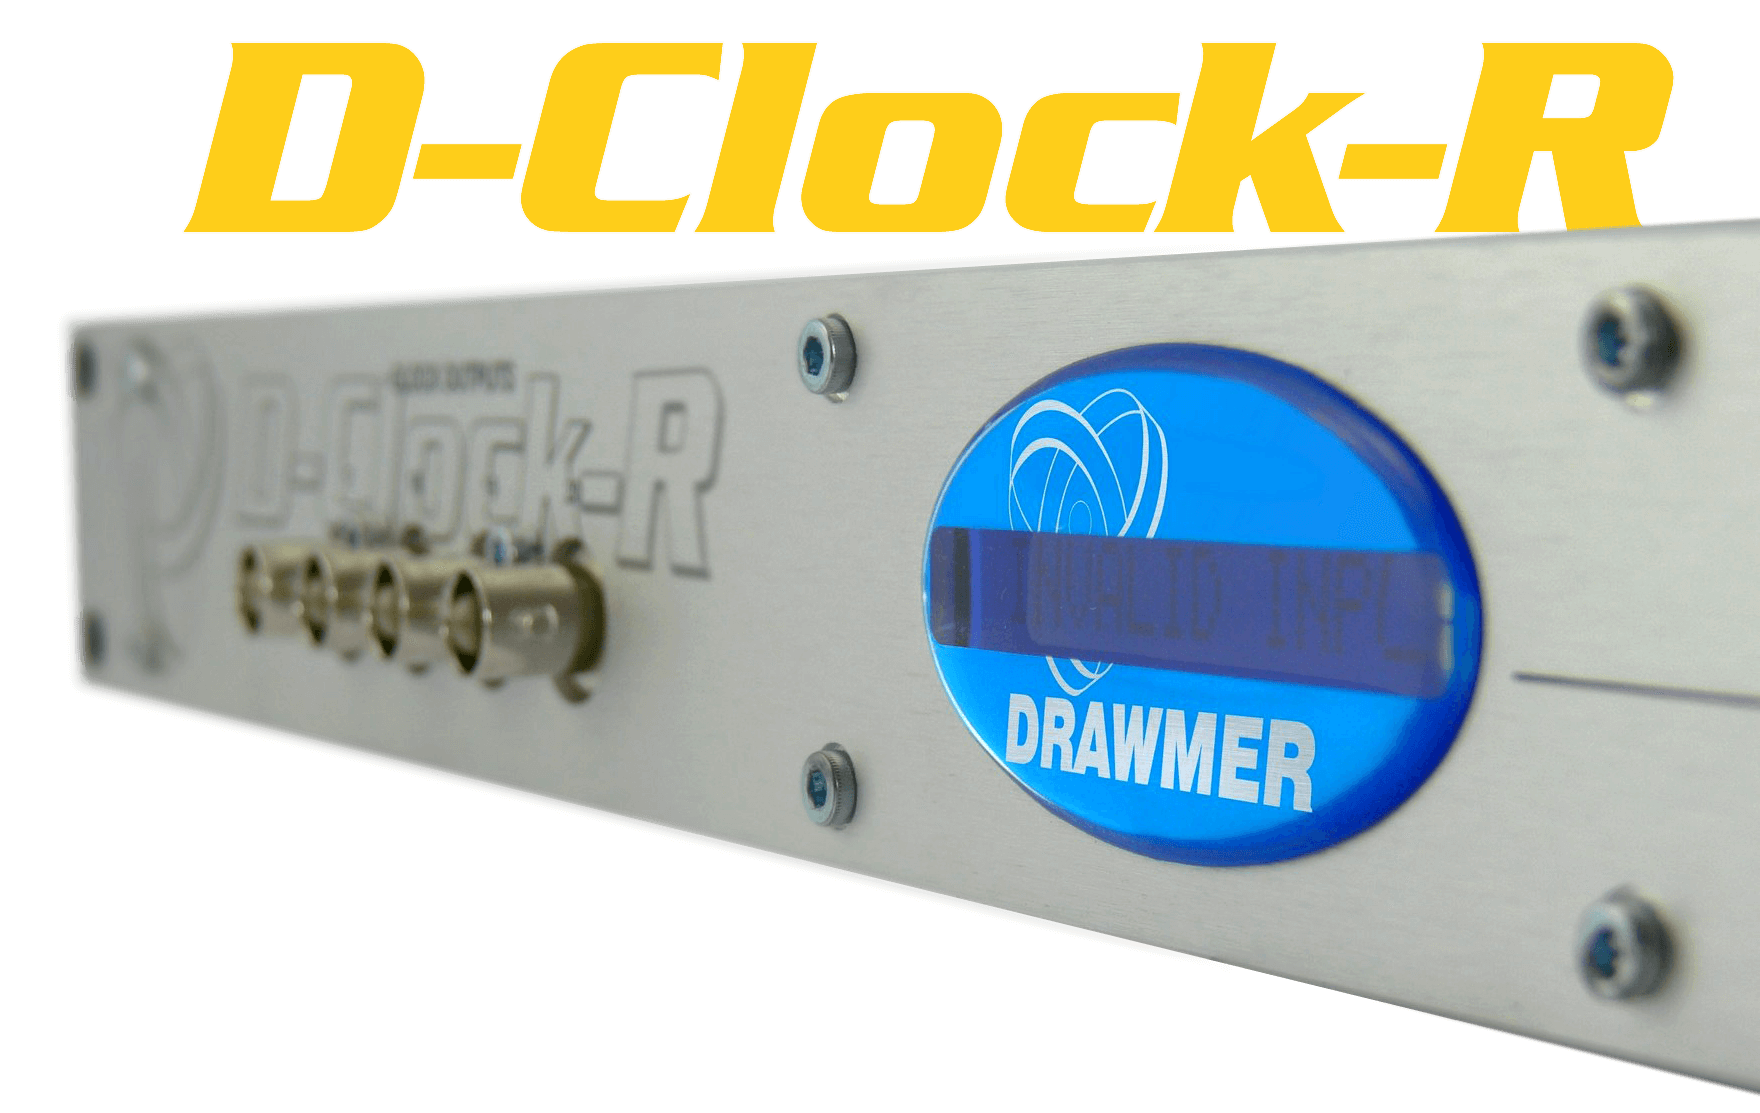 Close up of the DClock-R front panel display with the logo above in yellow